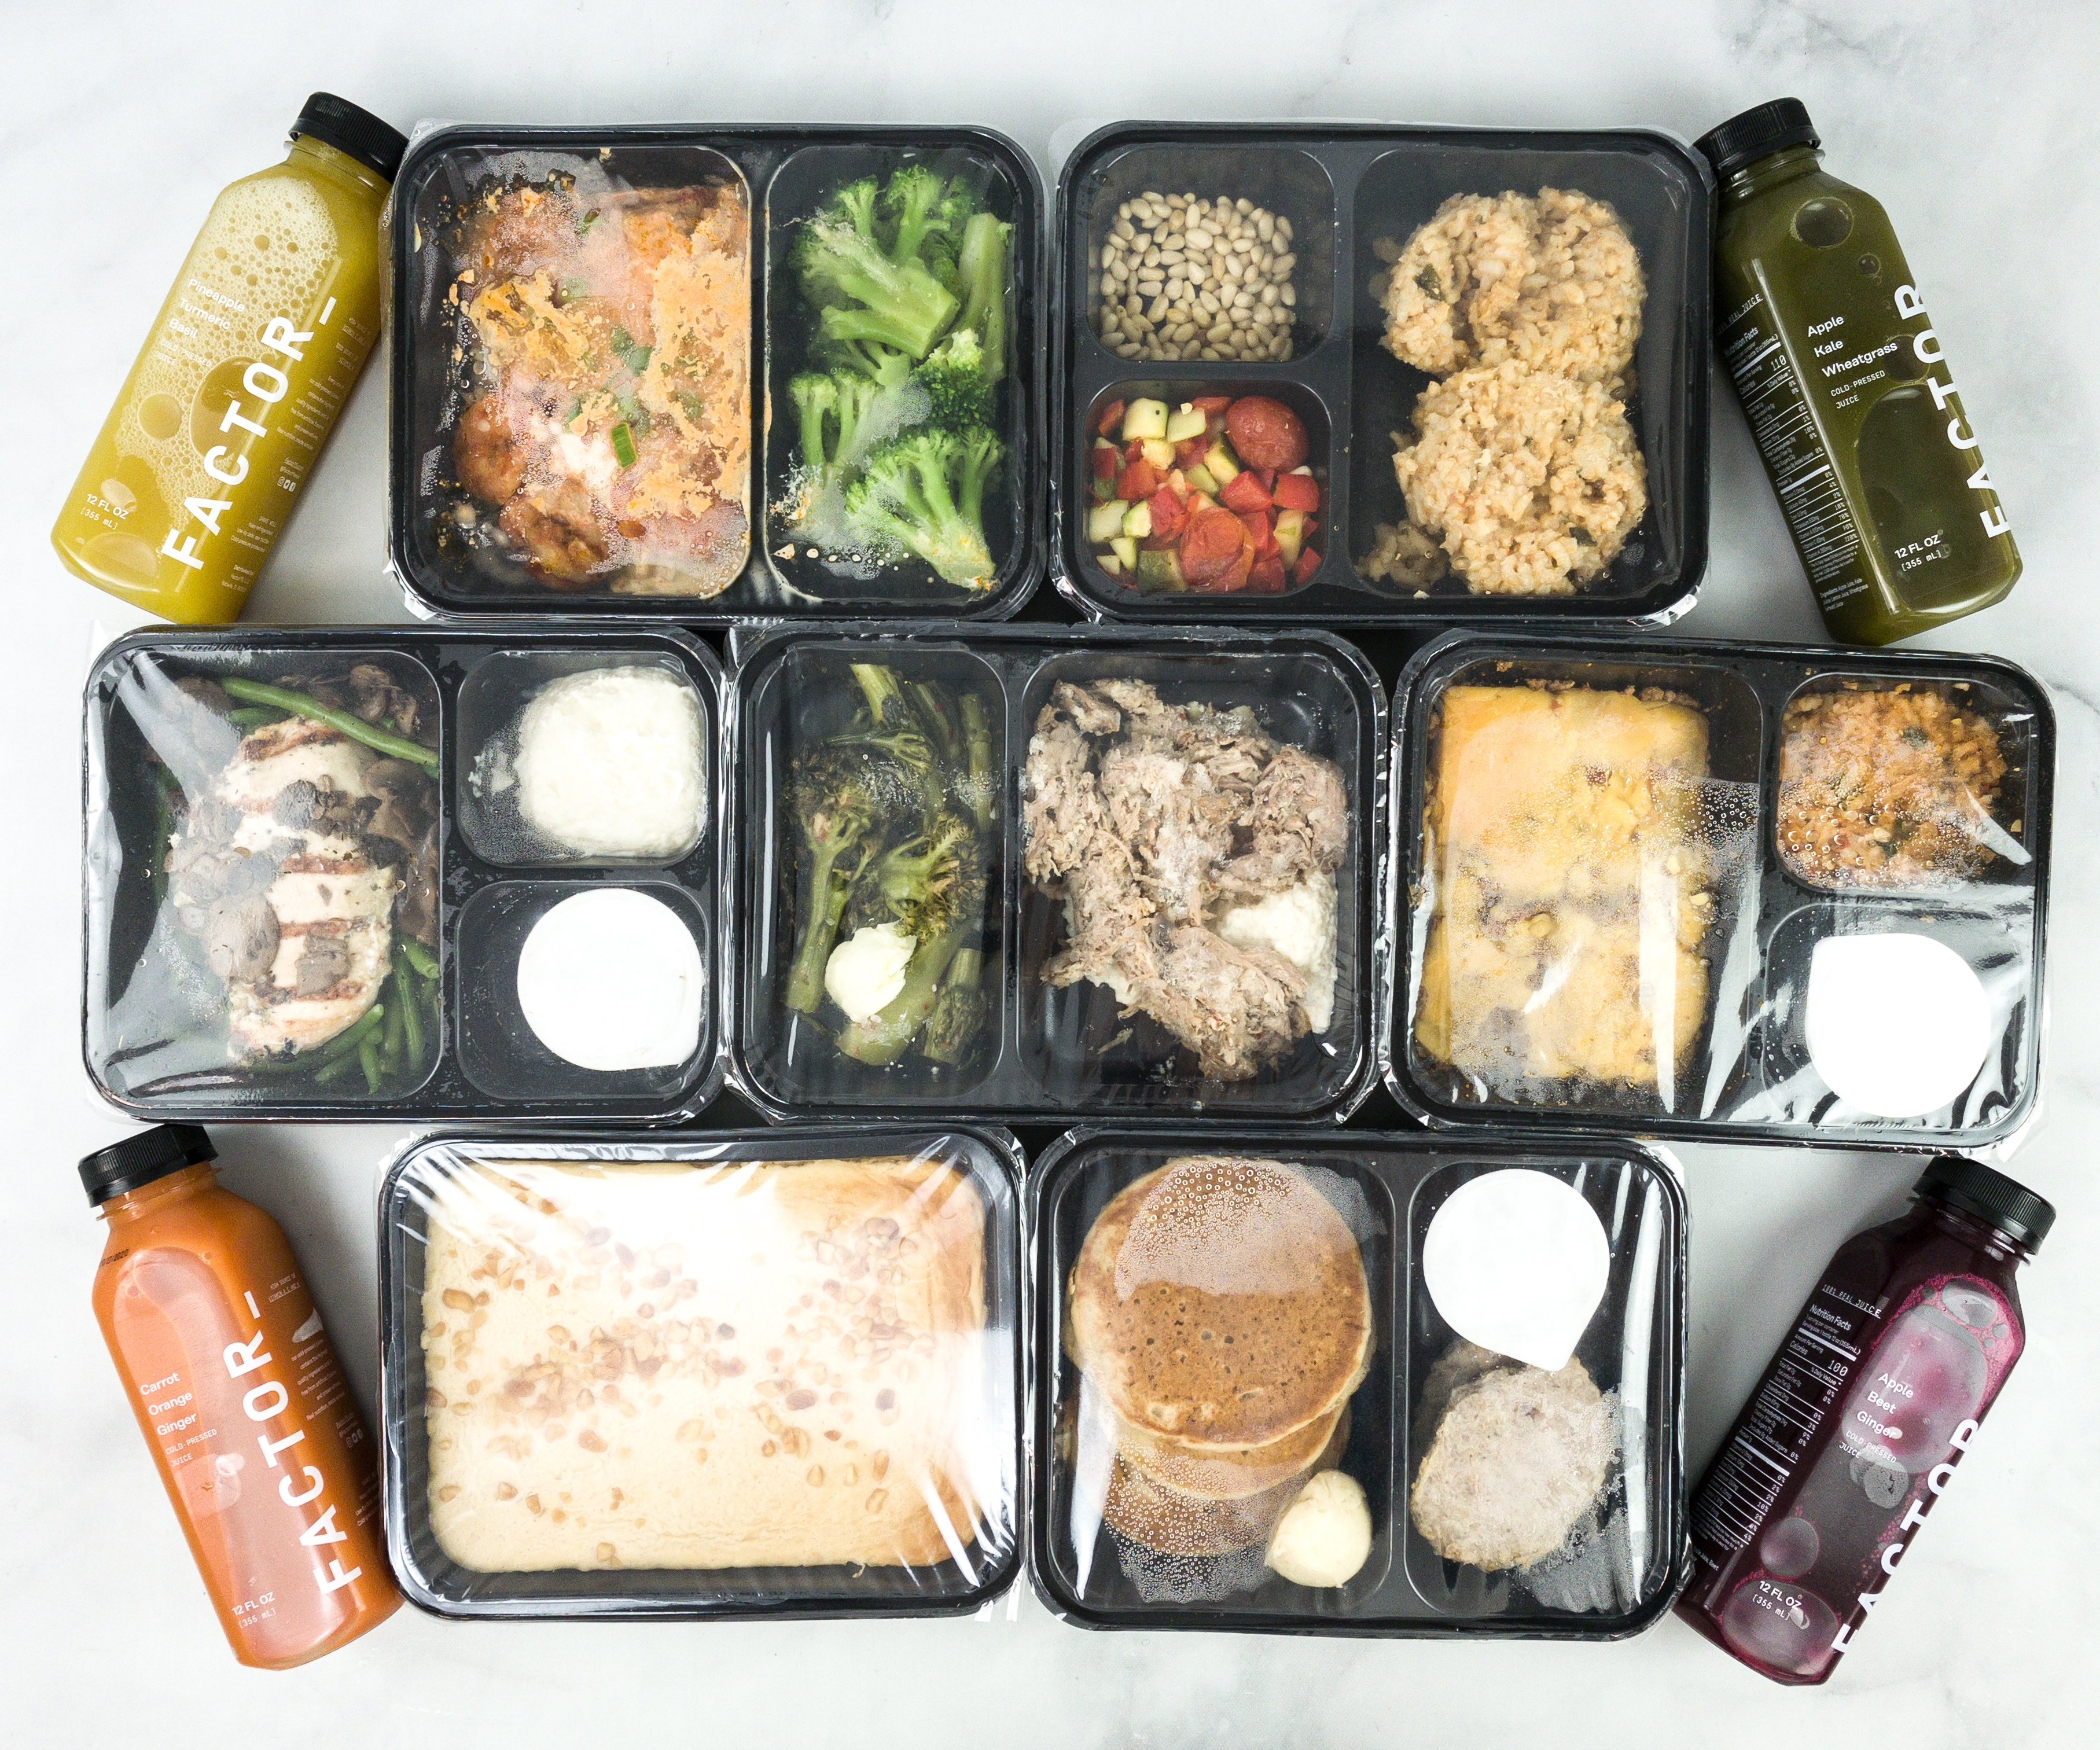 Factor 75 Review: Healthy AND Organic Meals - MBSF